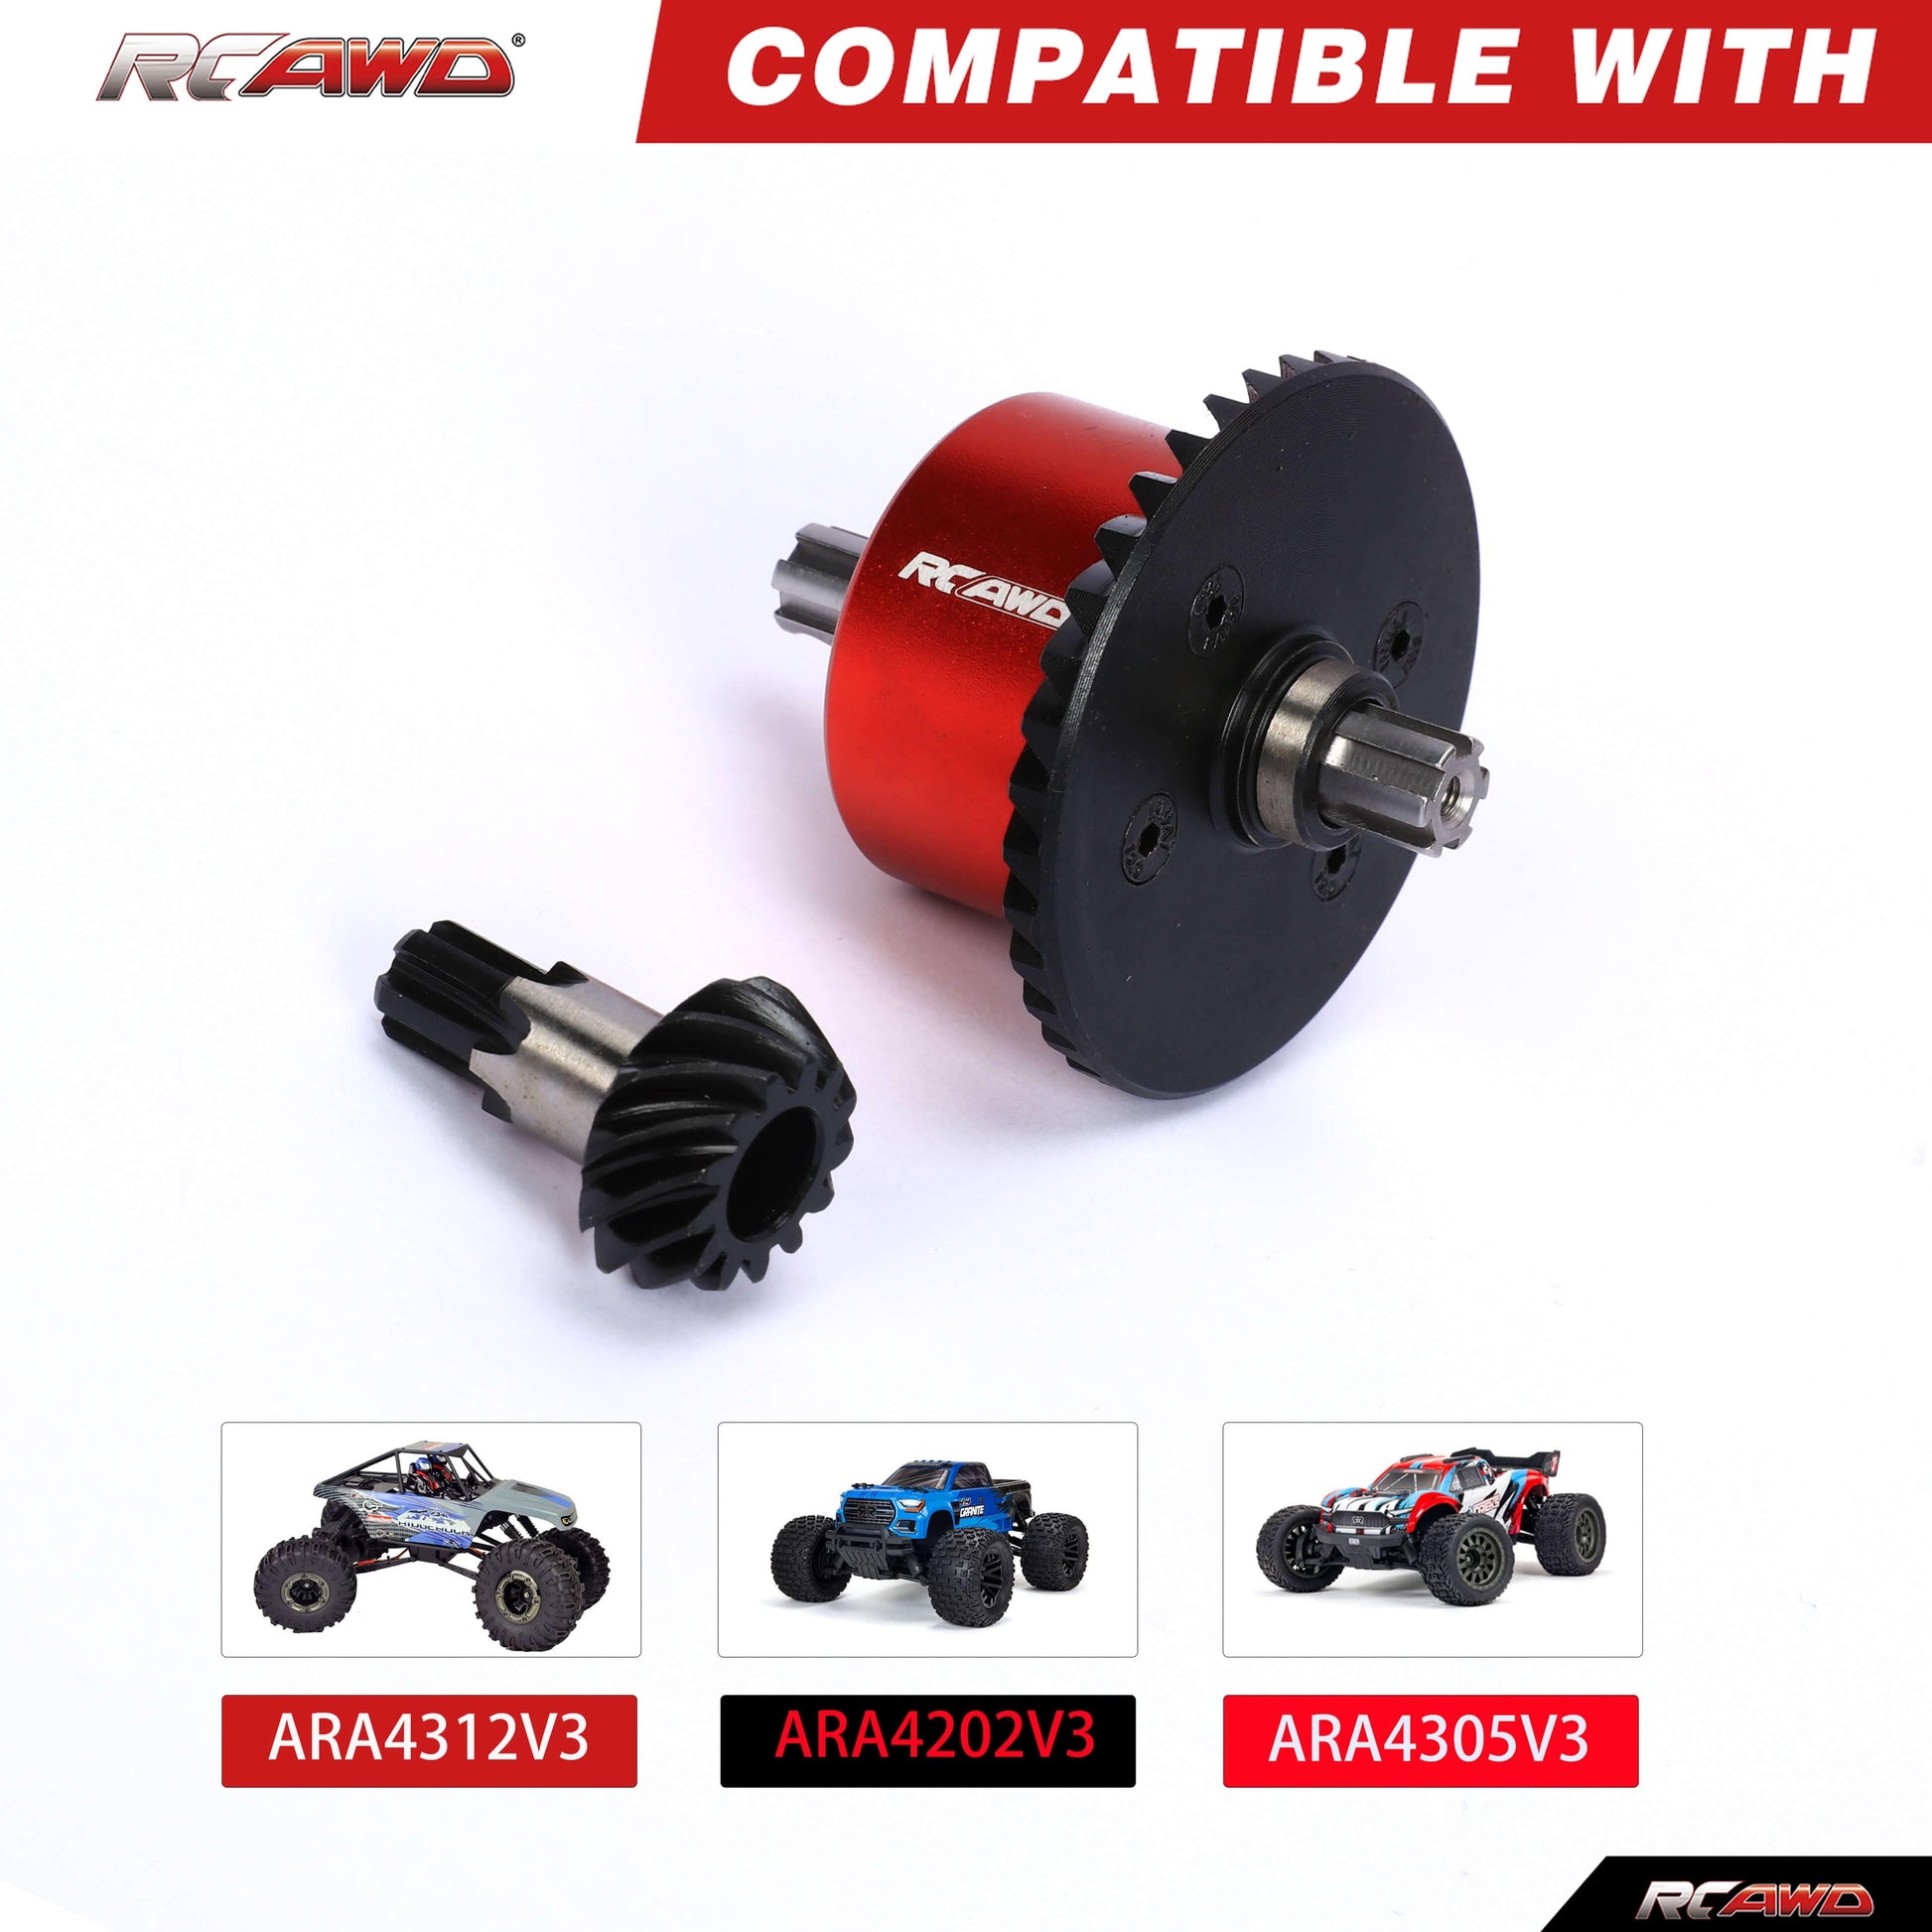 RCAWD ARRMA 3S RCAWD ARRMA 3s Upgrades 37T 13T Diff Set+Tilting gears for RC Car